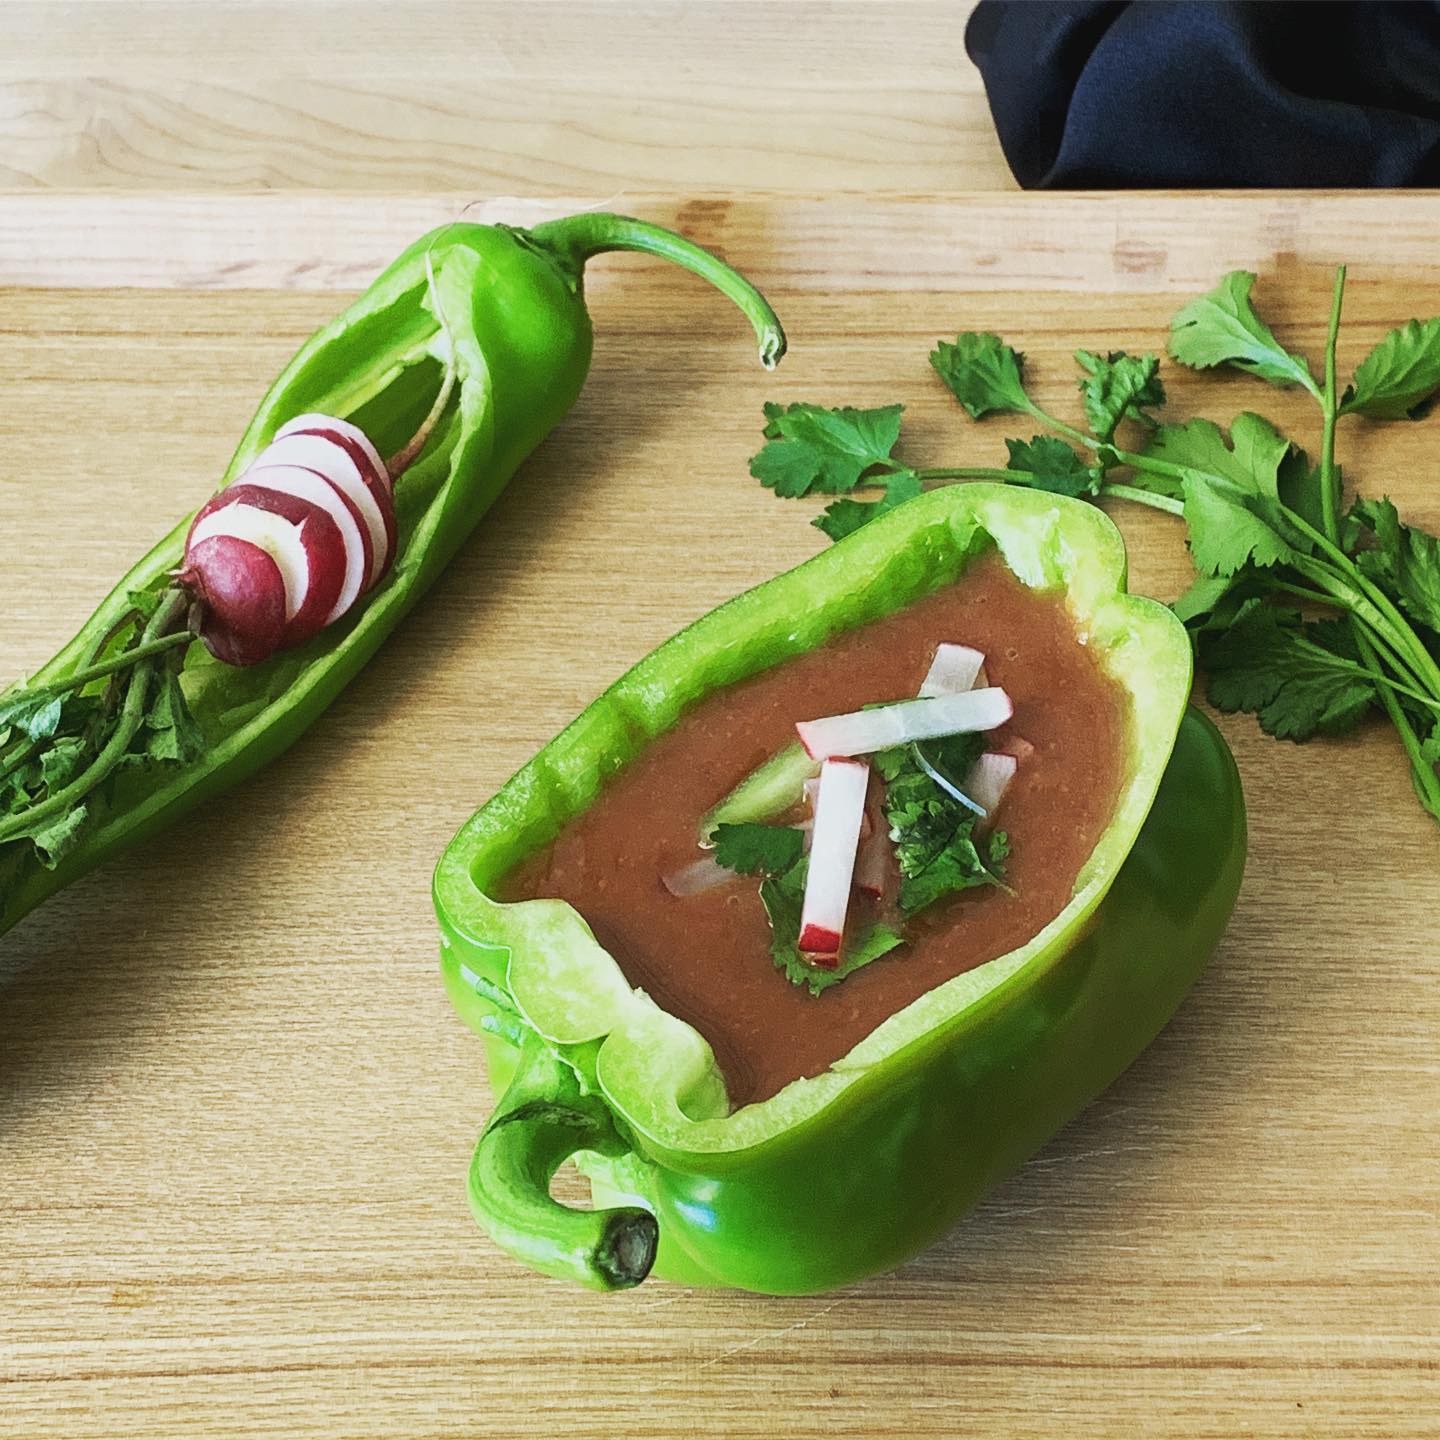 Blended red kidney bean soup with cilantro and peppers by @maxkiesler